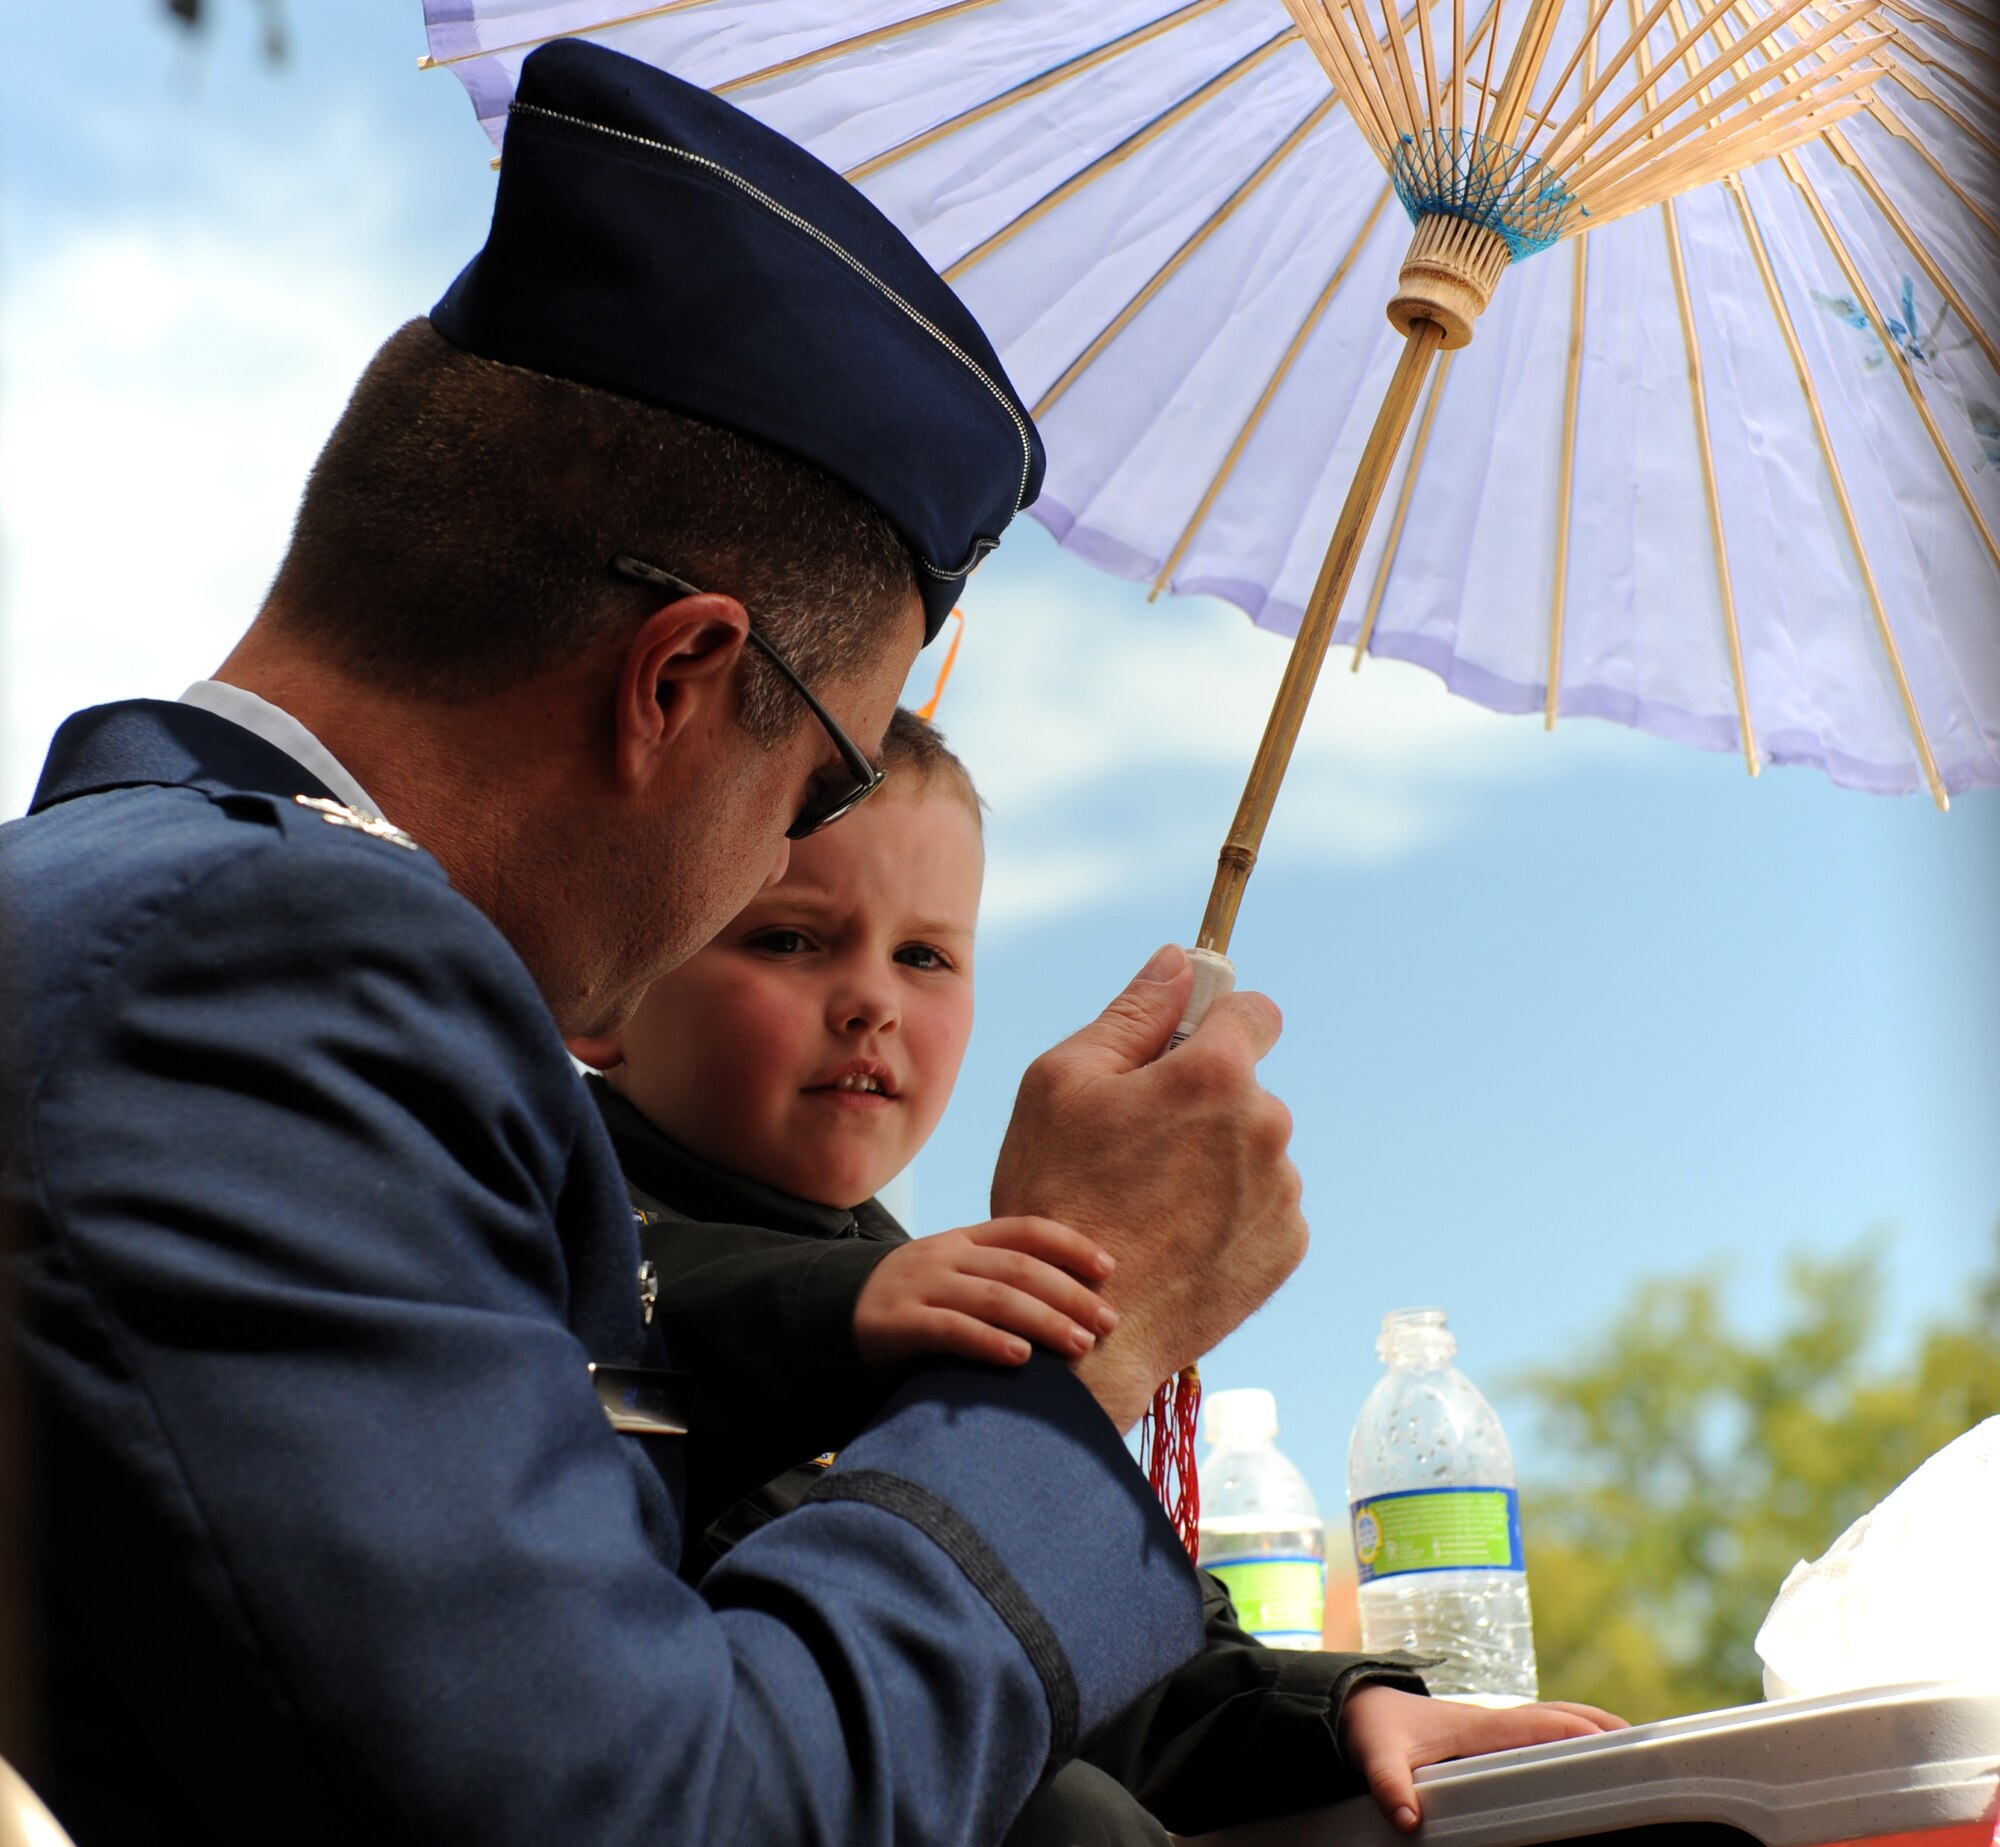 Col. Robert Haines, 9th Operations Group commander, and his son watch the Bok Kai Festival in Marysville, Calif., March 16, 2013. Beale’s Honor Guard and members of the 9th Reconnaissance Wing leadership marched in the parade. (U.S. Air Force photo by Staff Sgt. Robert M. Trujillo/Released)